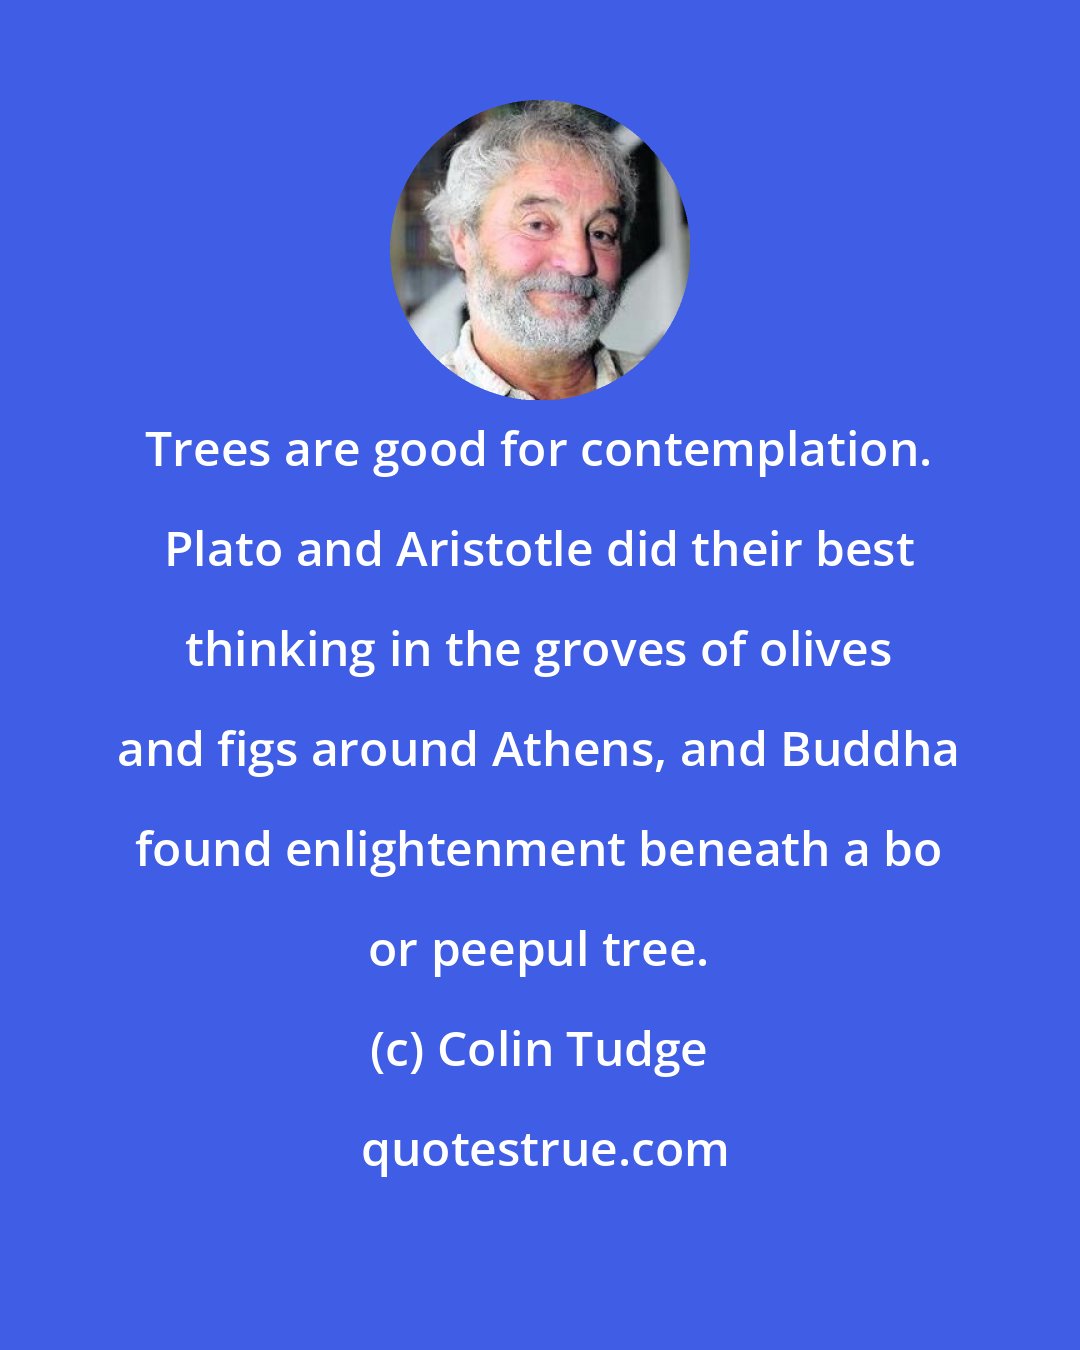 Colin Tudge: Trees are good for contemplation. Plato and Aristotle did their best thinking in the groves of olives and figs around Athens, and Buddha found enlightenment beneath a bo or peepul tree.